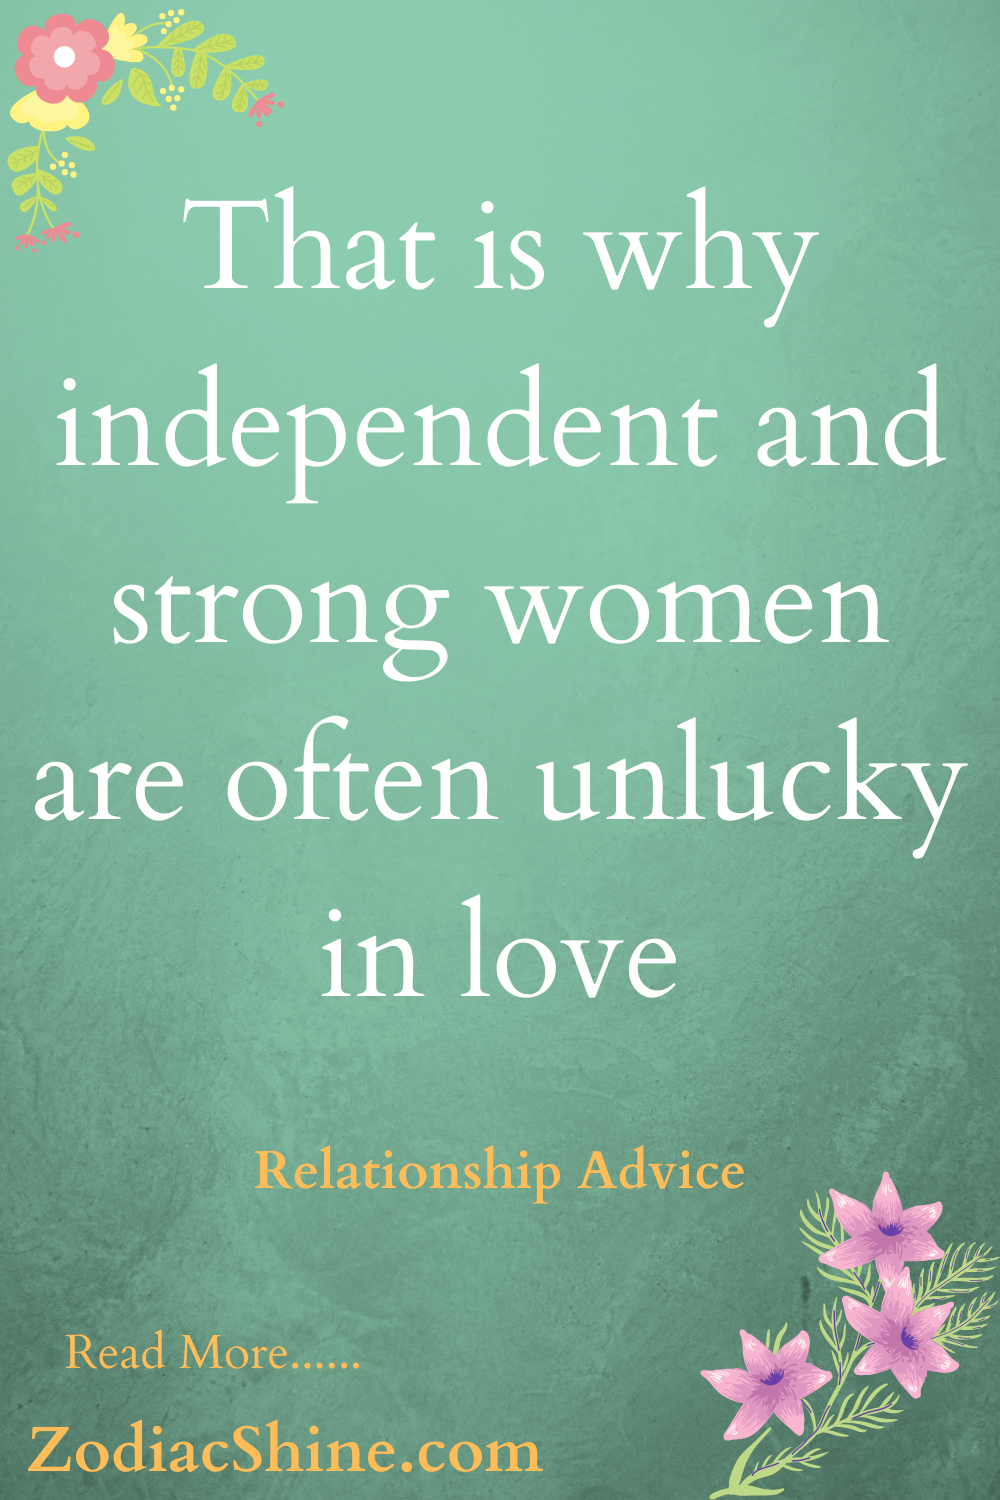 That is why independent and strong women are often unlucky in love